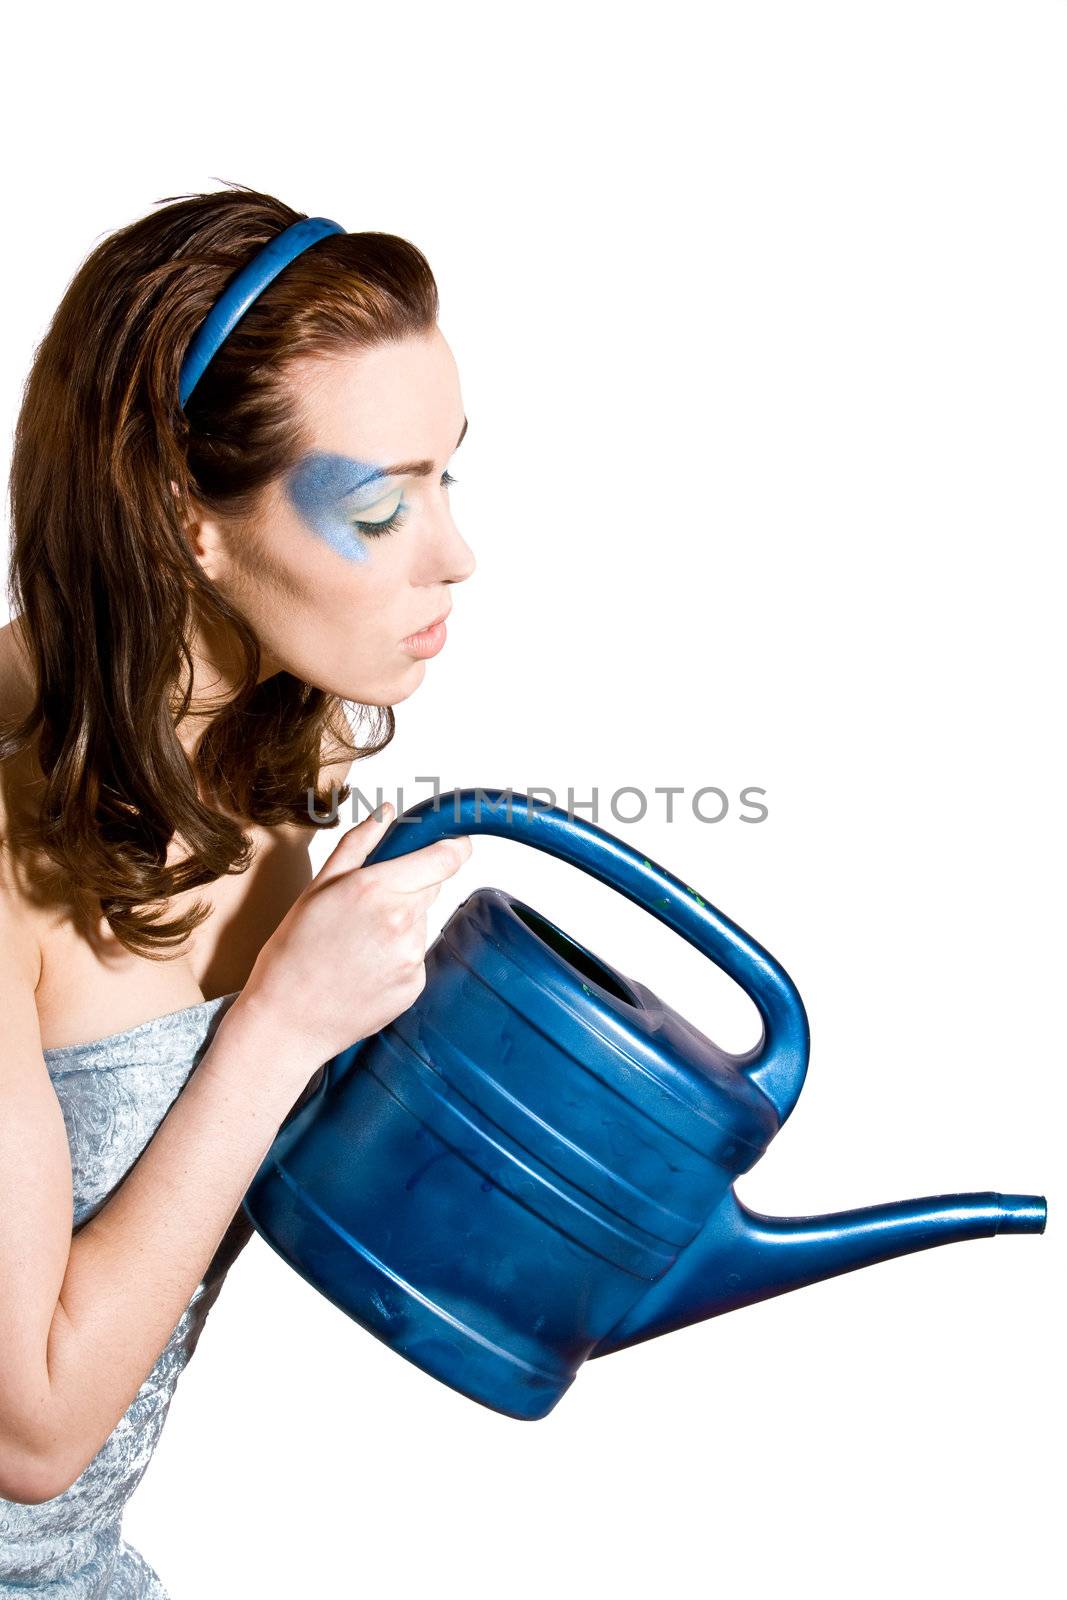 Pretty brunette with blue eyeshadow watering the plants with a blue watering can